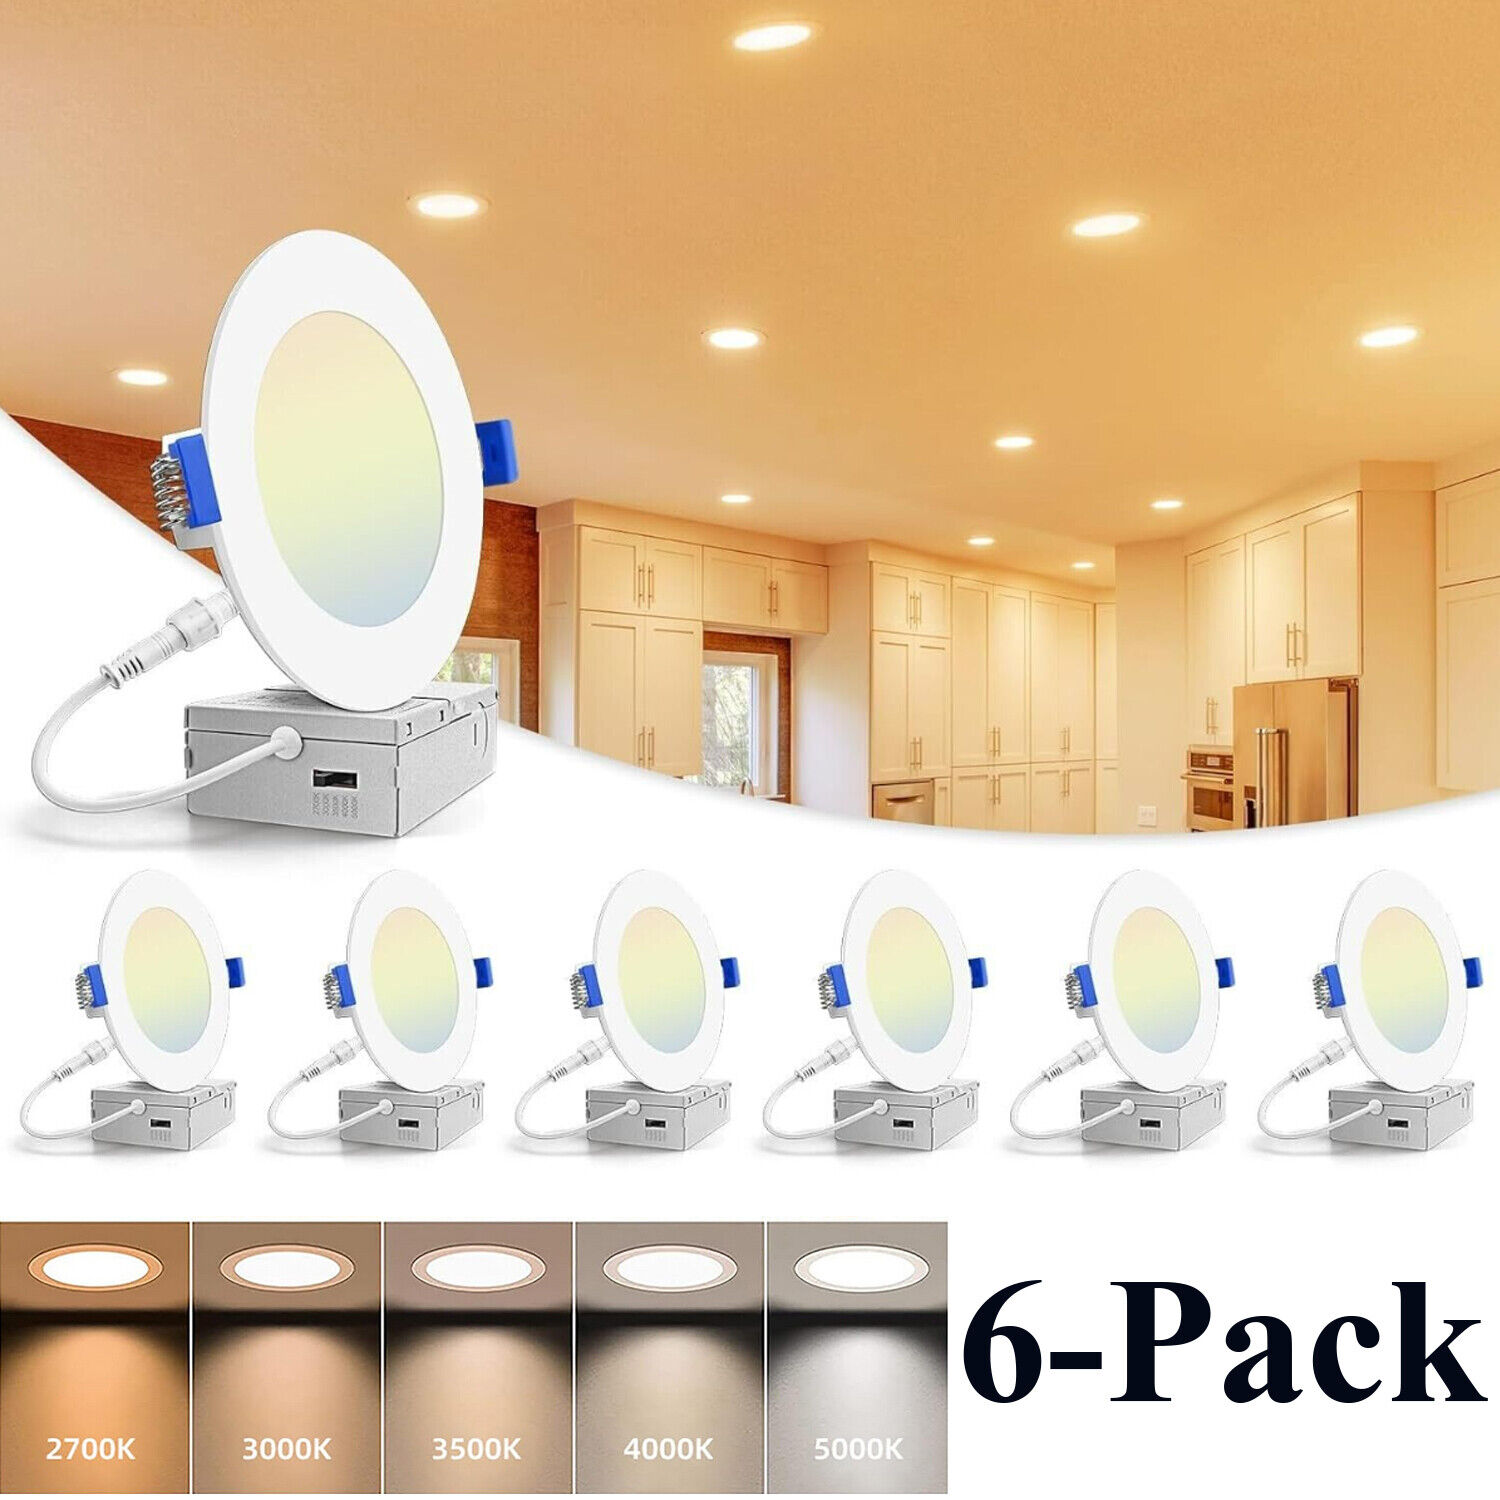 6-12pcs 6 in. 90 CRI 2700K-5000K 5CCT Selectable LED Dimmable Ceiling Disk Light